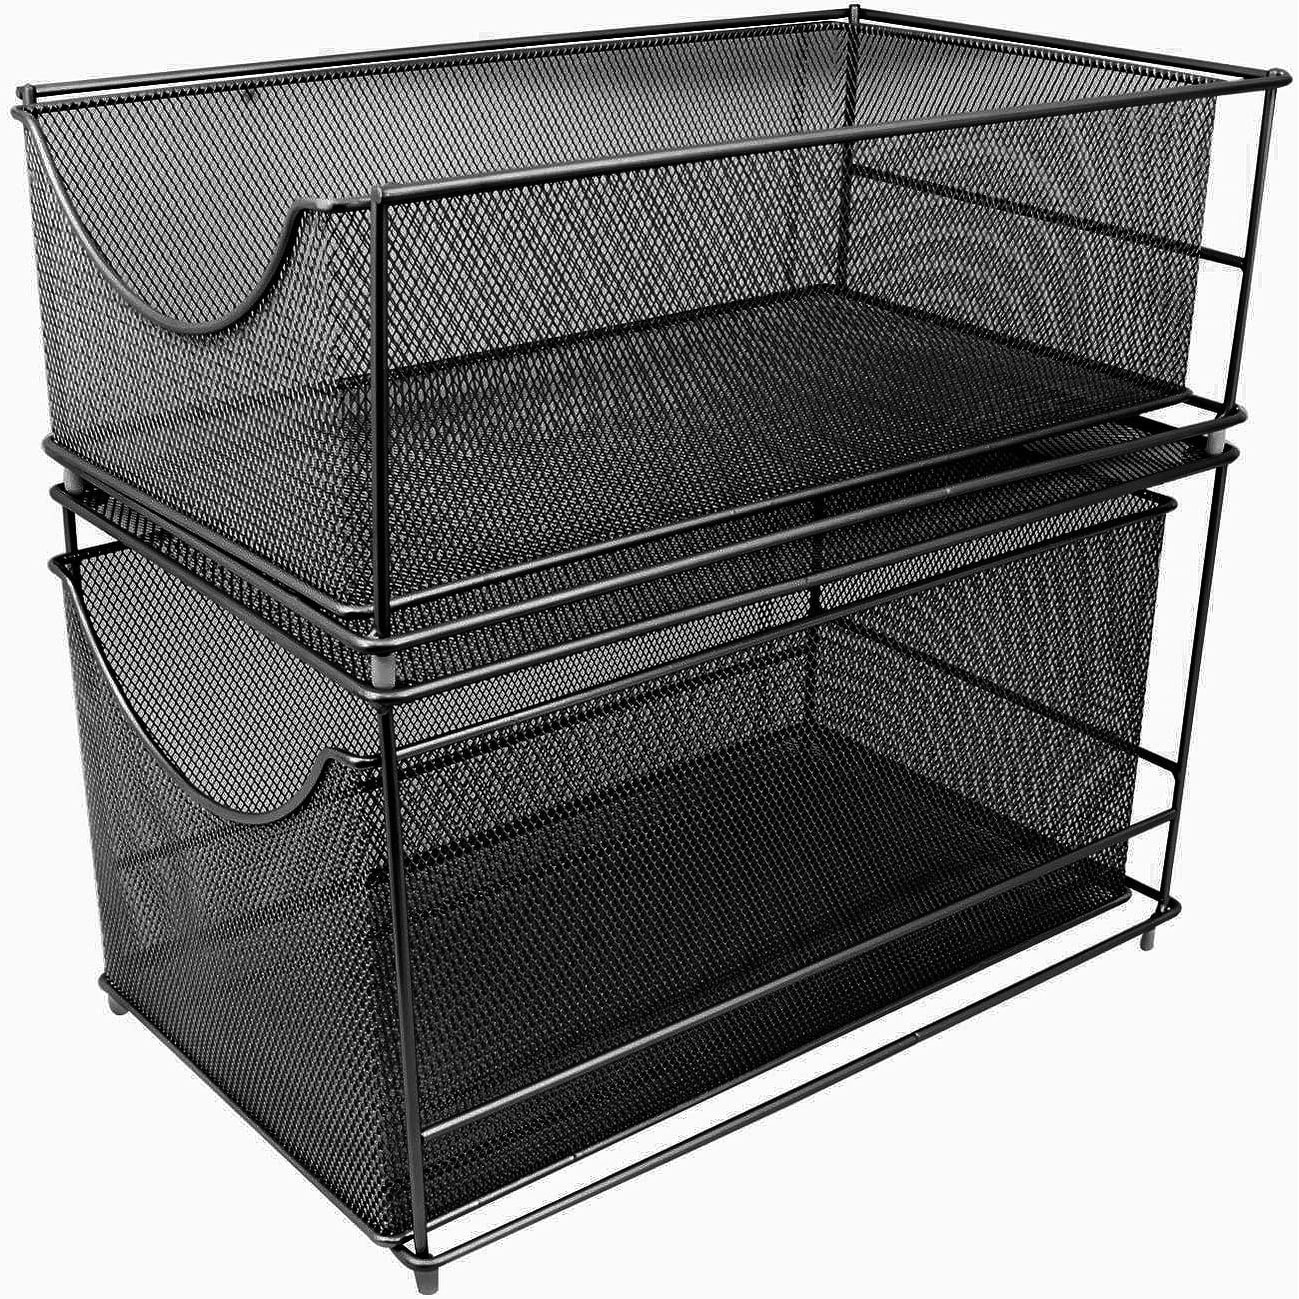 https://ak1.ostkcdn.com/images/products/is/images/direct/428d3ee5c31ce7c18d62099ec5e6812923231420/Mesh-Steel-Cabinet-Organizer-Set-with-2-Pull-Out-Drawers---Black.jpg